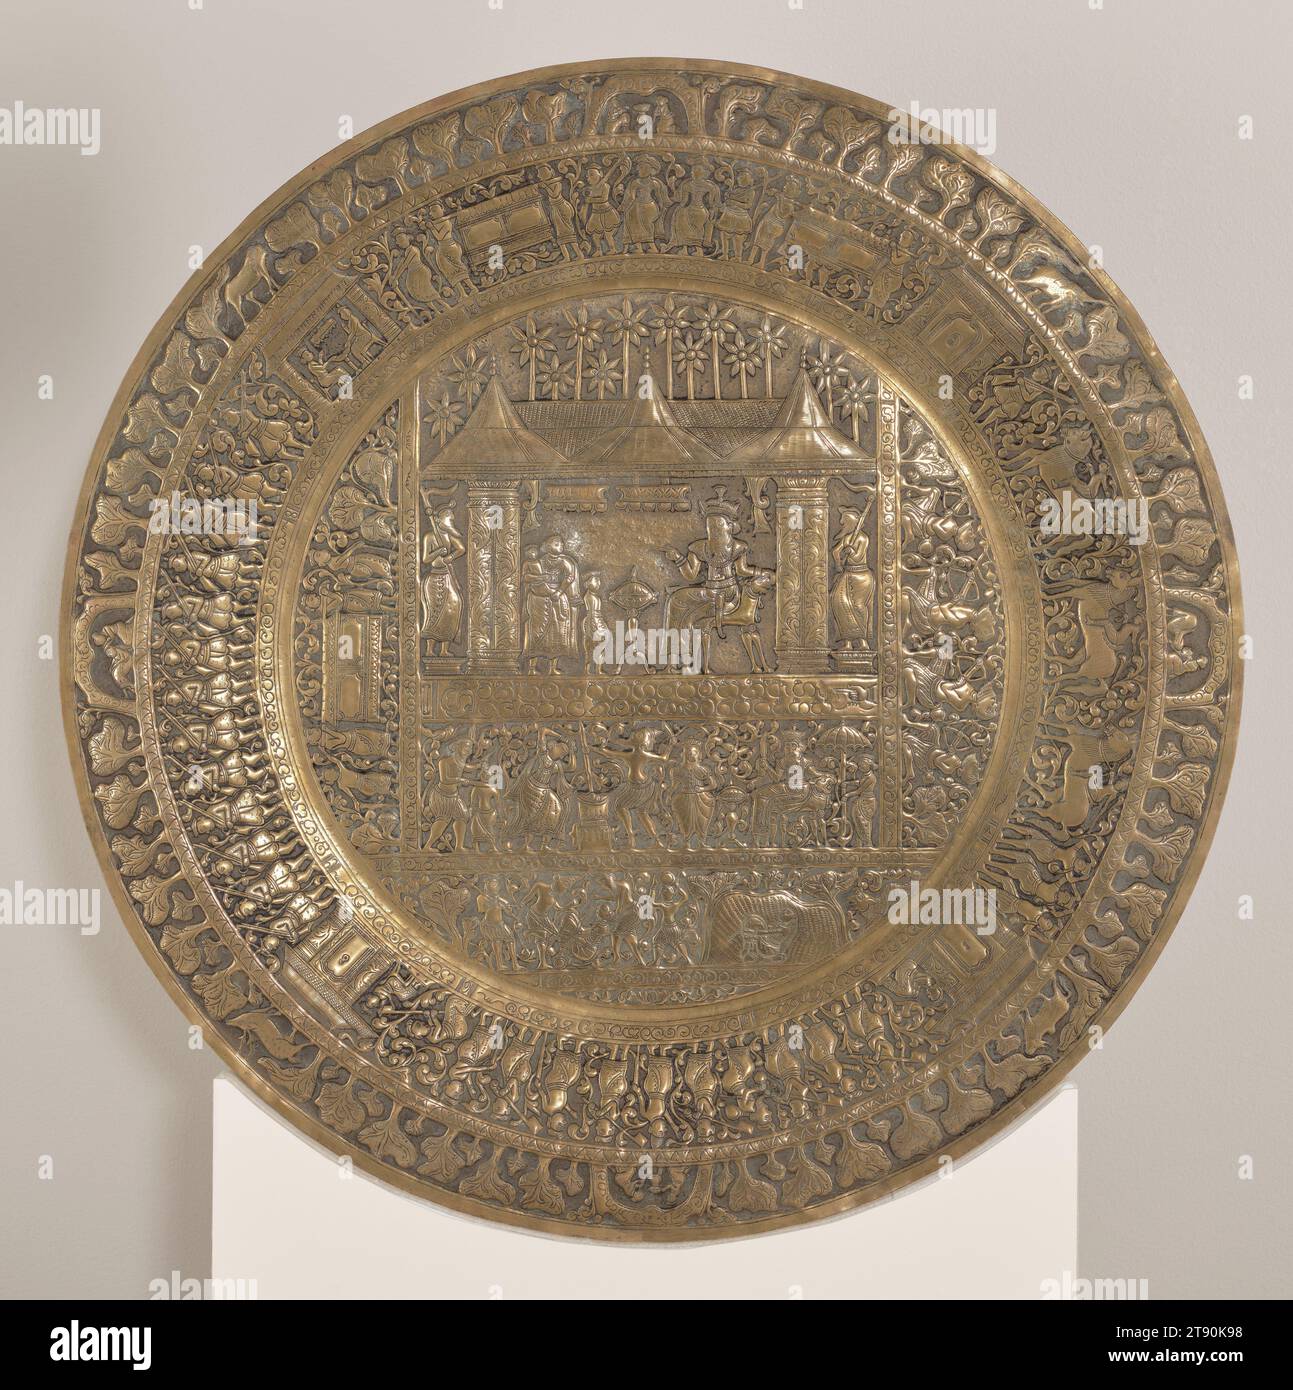 Commemorative dish depicting the fall of the Kingdom of Kandy, c. 1815, 3/4 × 24 × 24 in. (1.91 × 60.96 × 60.96 cm), Brass, Sri Lanka, 19th century, The vivid scenes hammered into the surface of this large brass dish commemorate the epic fall of the Kingdom of Kandy (1592–1815), the last independent state in Sri Lanka (Ceylon) to succumb to British Crown rule. The design echoes that of Kandyan mural painting, with events staged in a series of illustrated panels, accompanied by brief descriptions incised in the local language (Sinhalese). Stock Photo